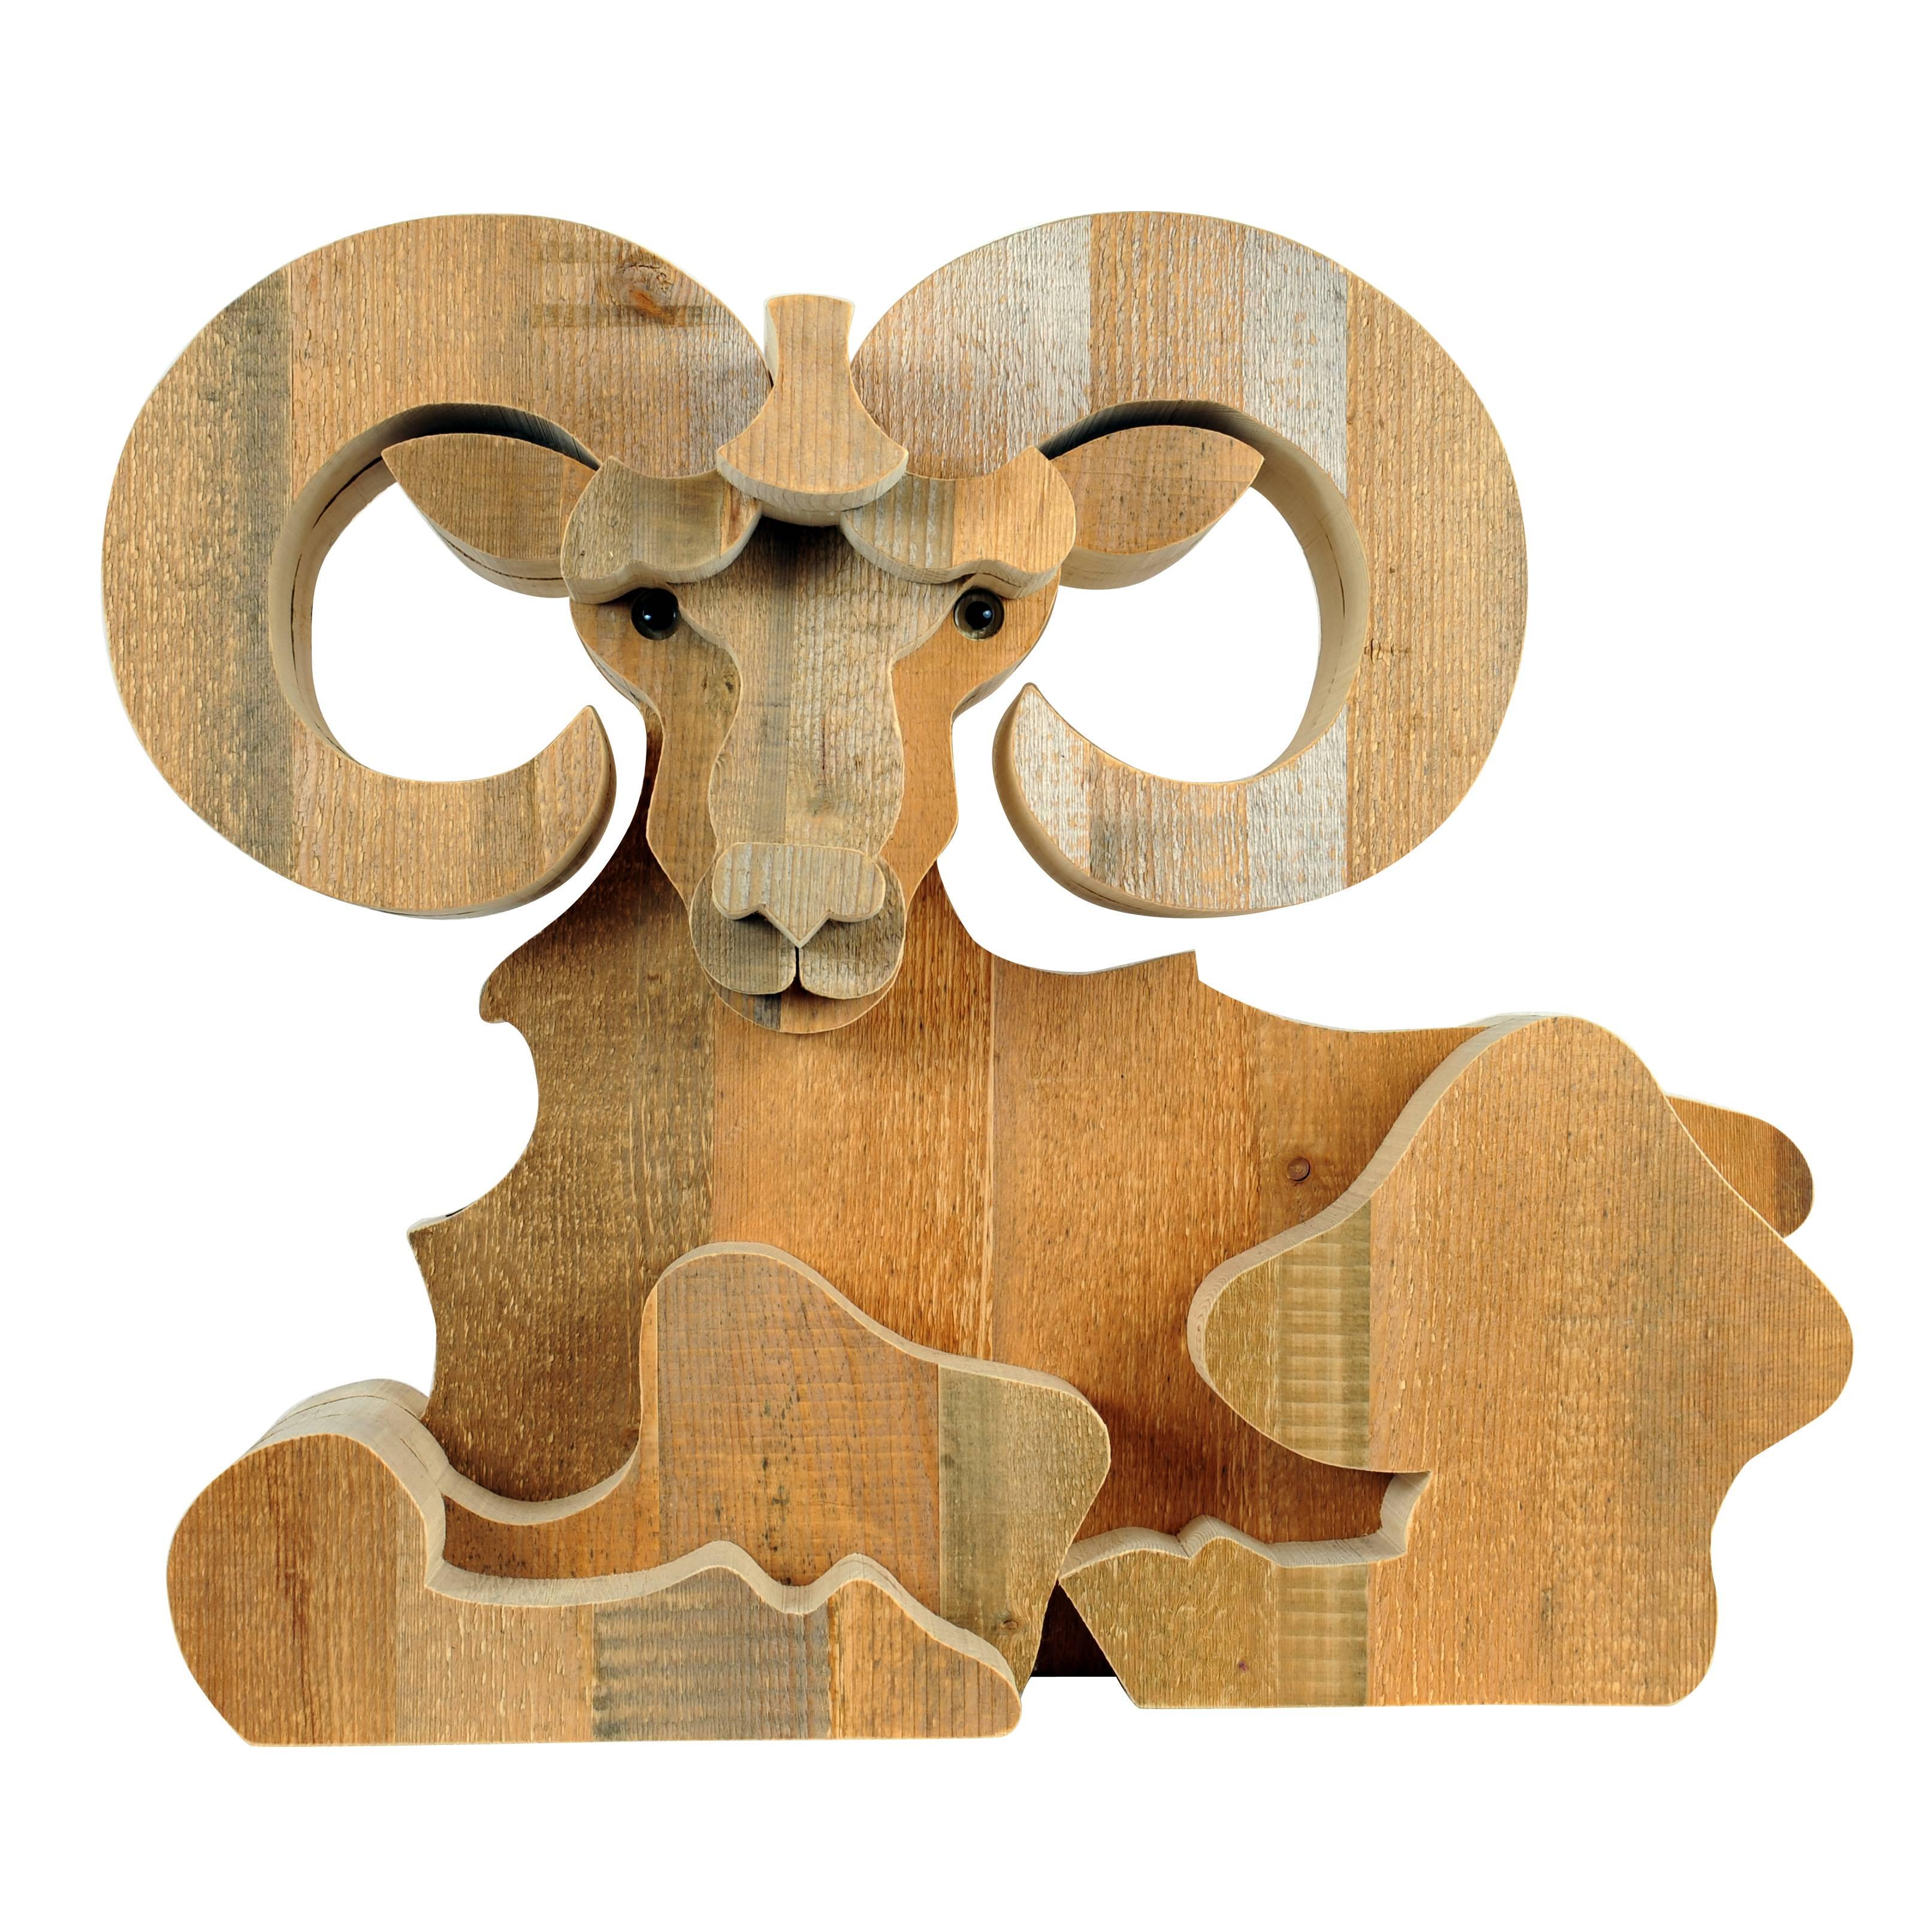 Aries Wood Sculpture by Michelangeli, Italy For Sale